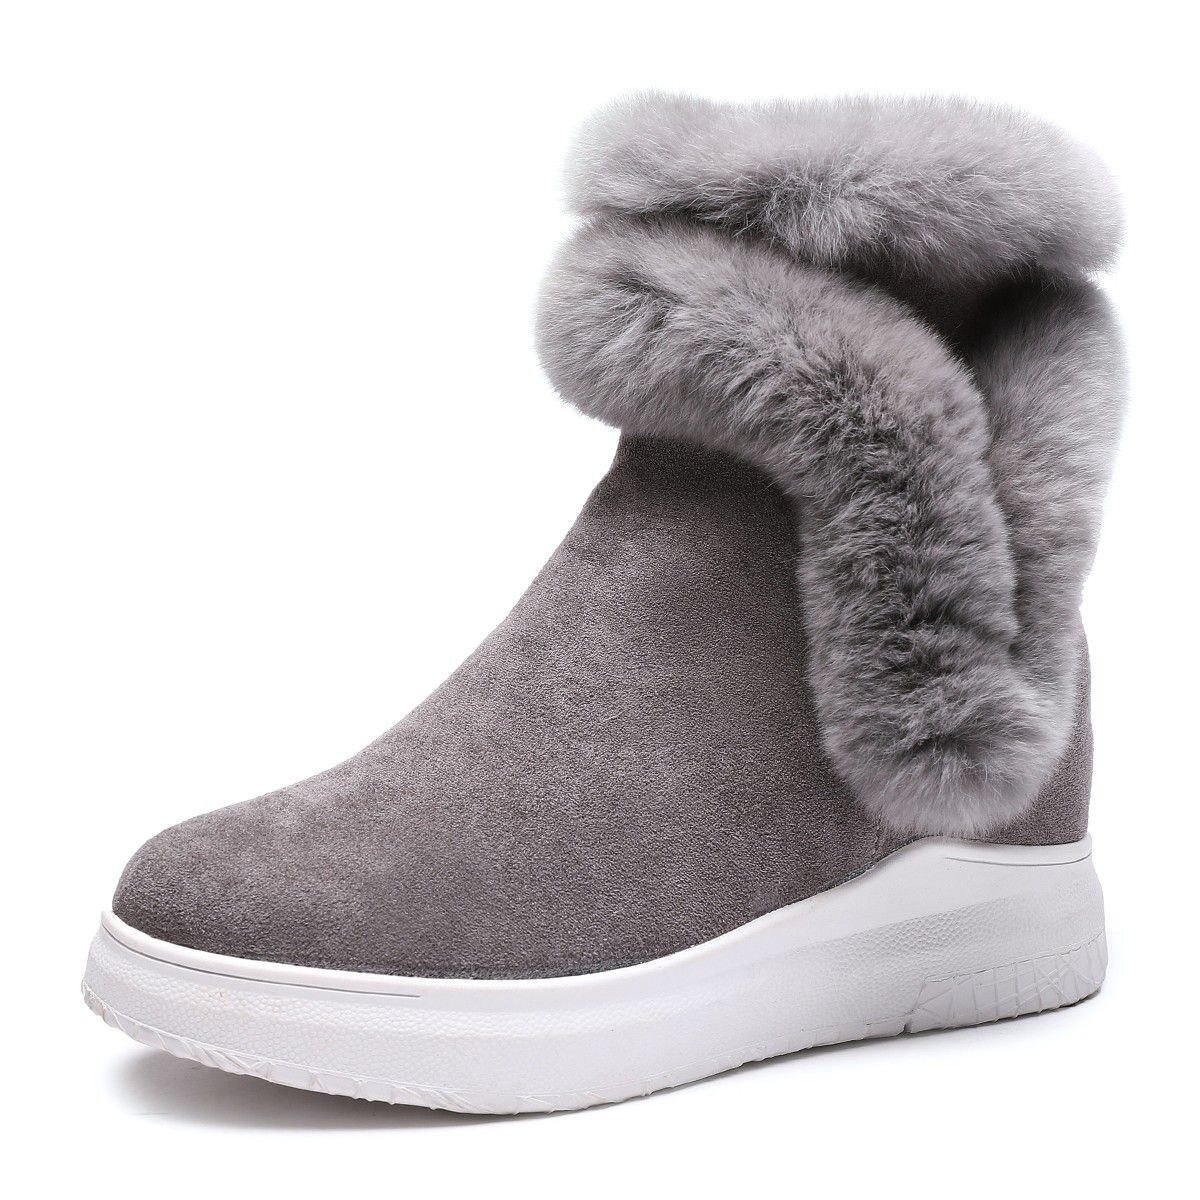 Womens Snow Boots Wedge Winter Warm Faux Fur Ankle Boots size# 7 grey